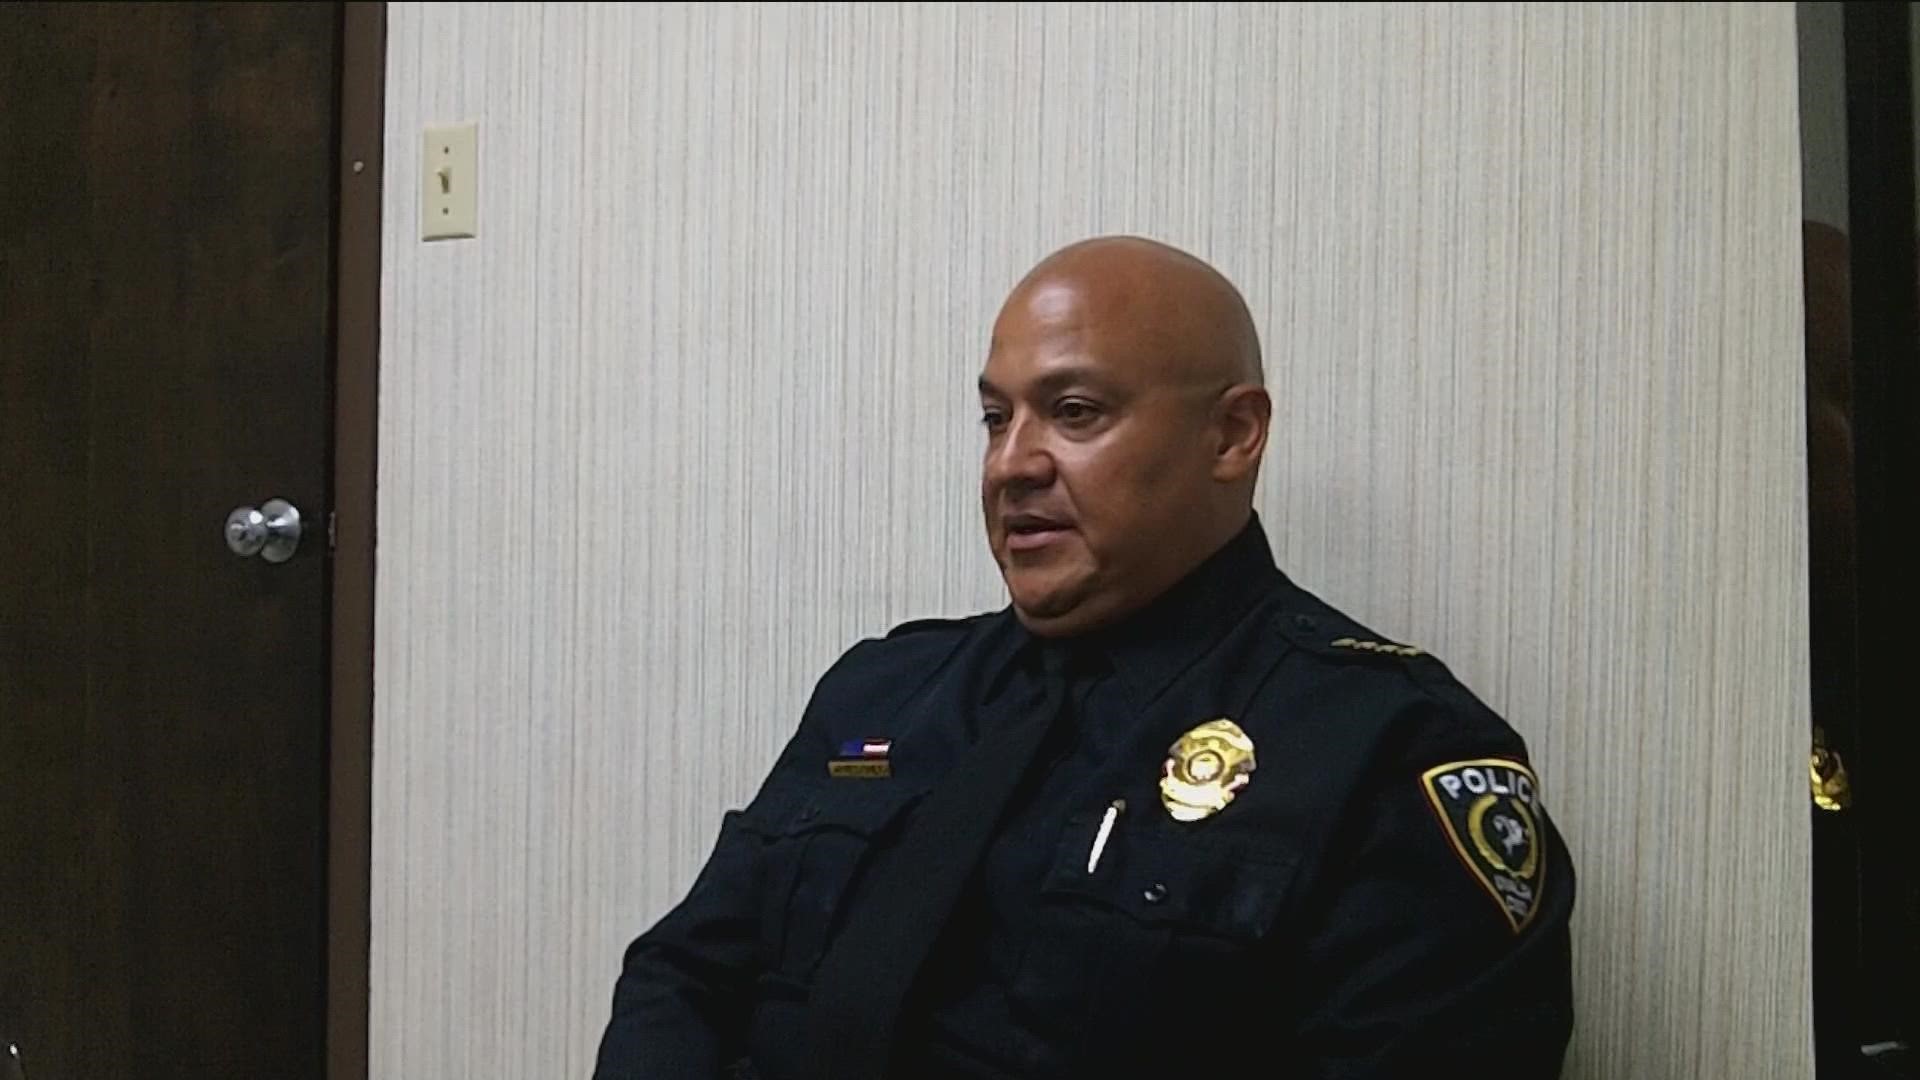 Arredondo spoke with investigators less than 24 hours after the Uvalde attack.